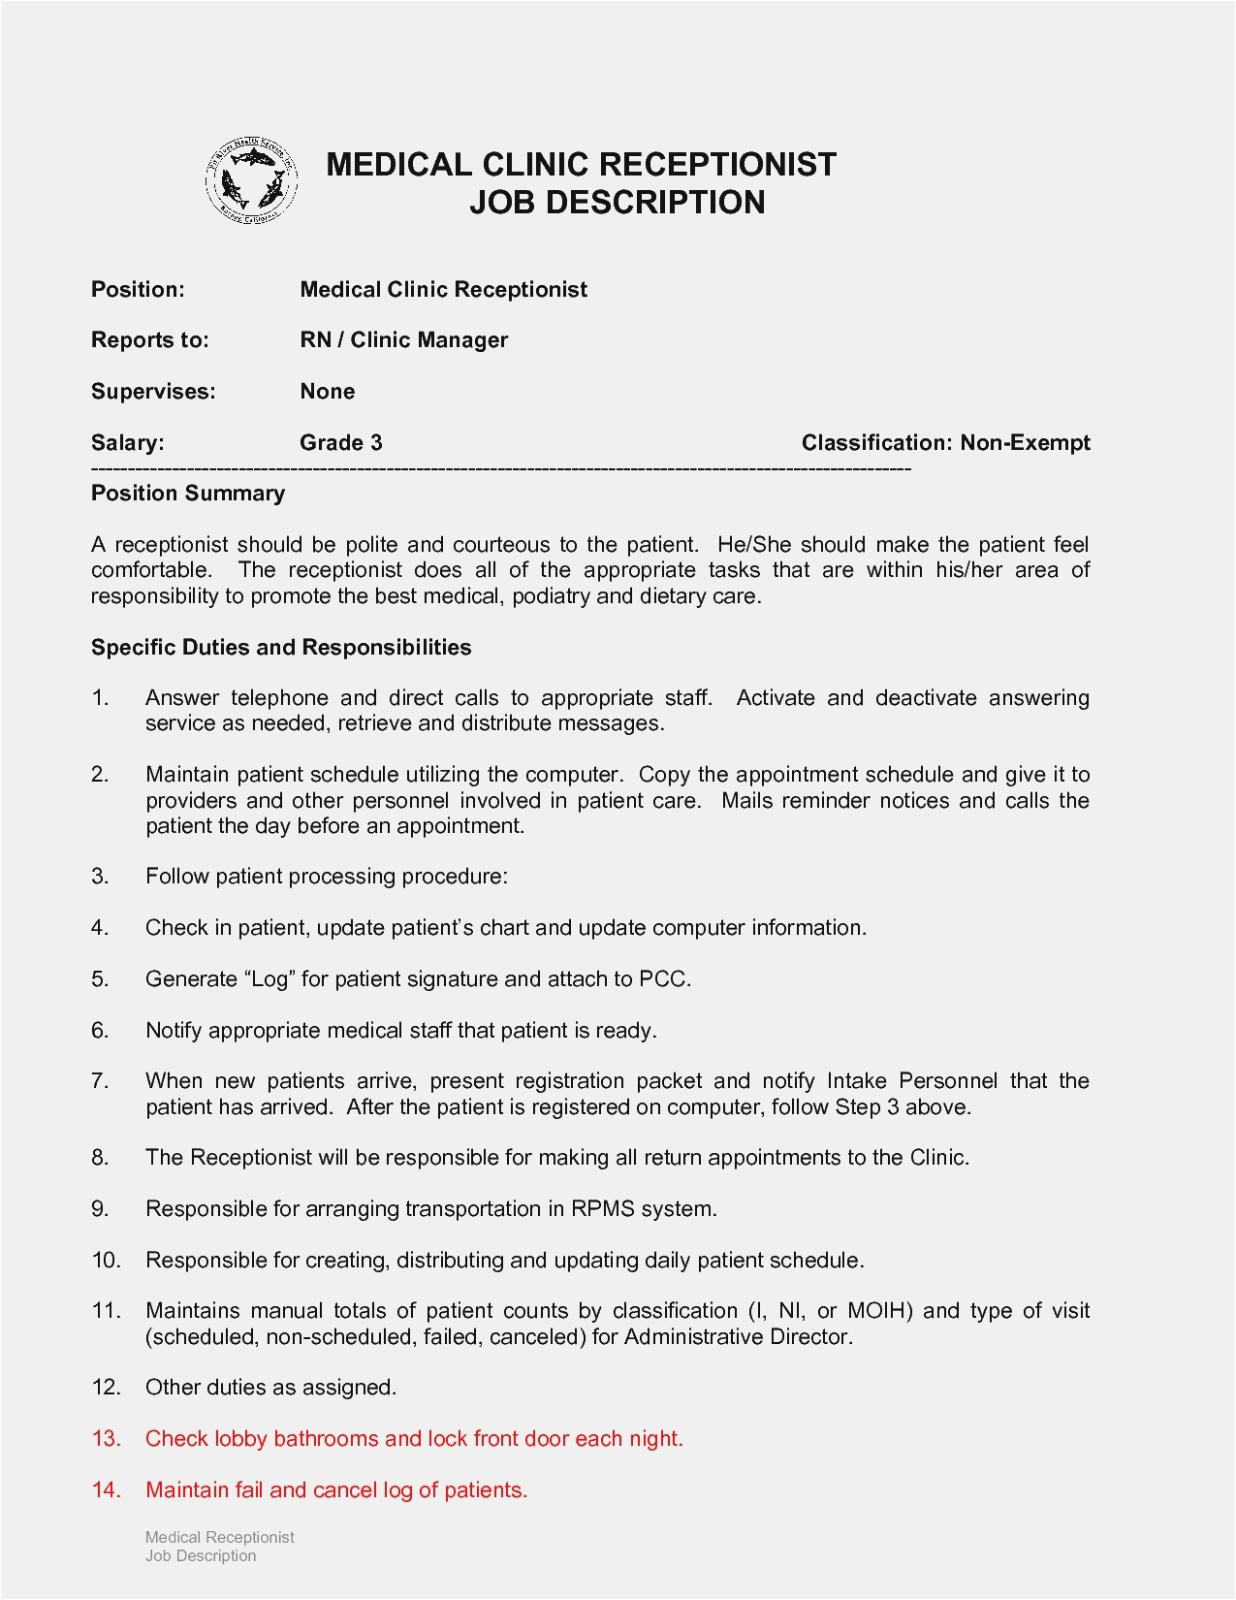 Sample Resume Objectives for Medical Receptionist 15 Great Receptionist